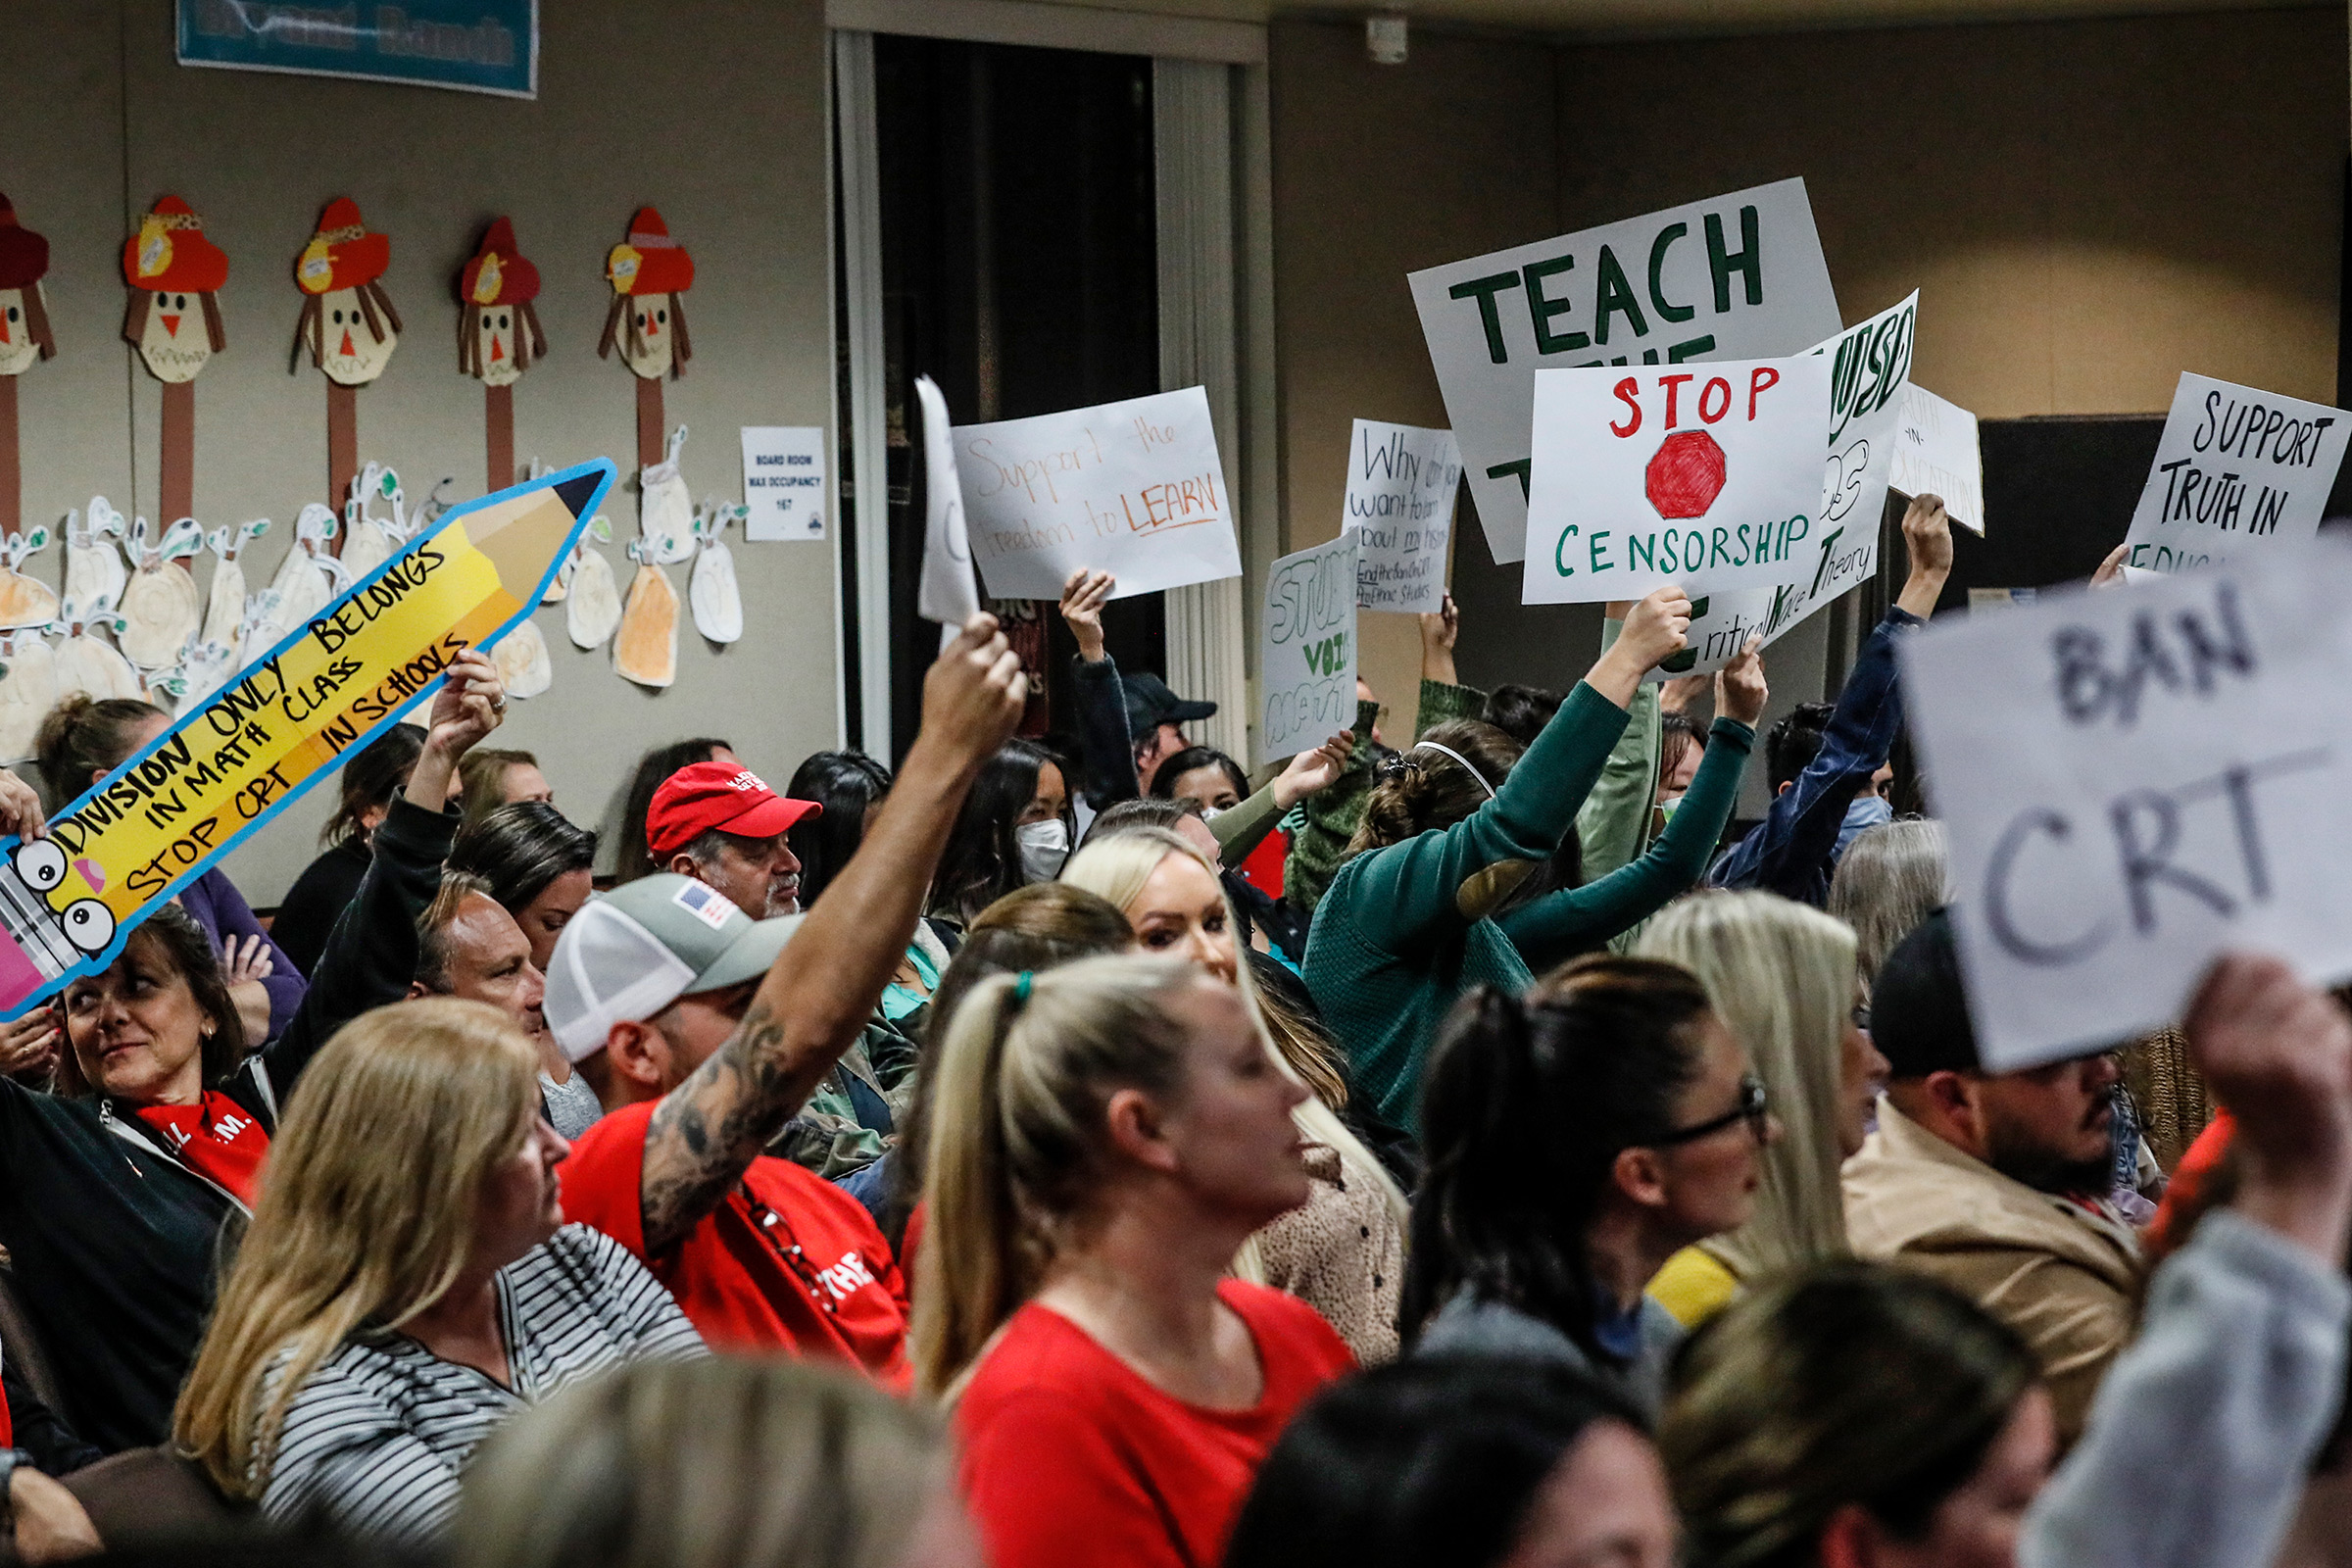 Proponents and opponents to teaching Critical Race Theory are in attendance as the Placentia Yorba Linda School Board discusses a proposed resolution to ban it from being taught in schools, in Yorba Linda, Calif., on Nov. 16, 2021.